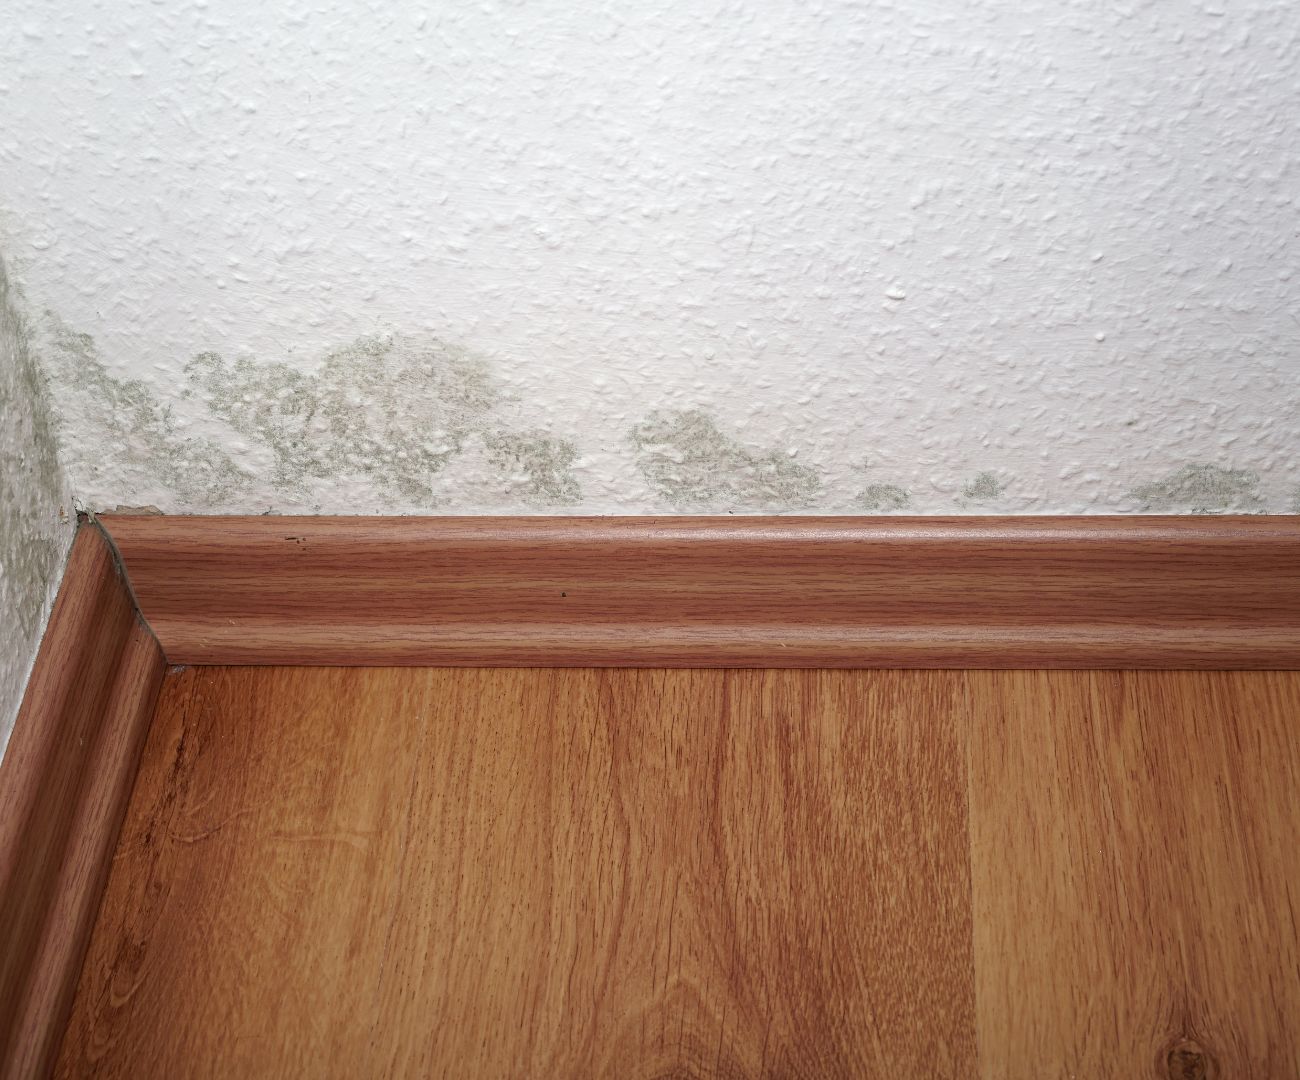 Mold Inspection reveals mold at floor boards